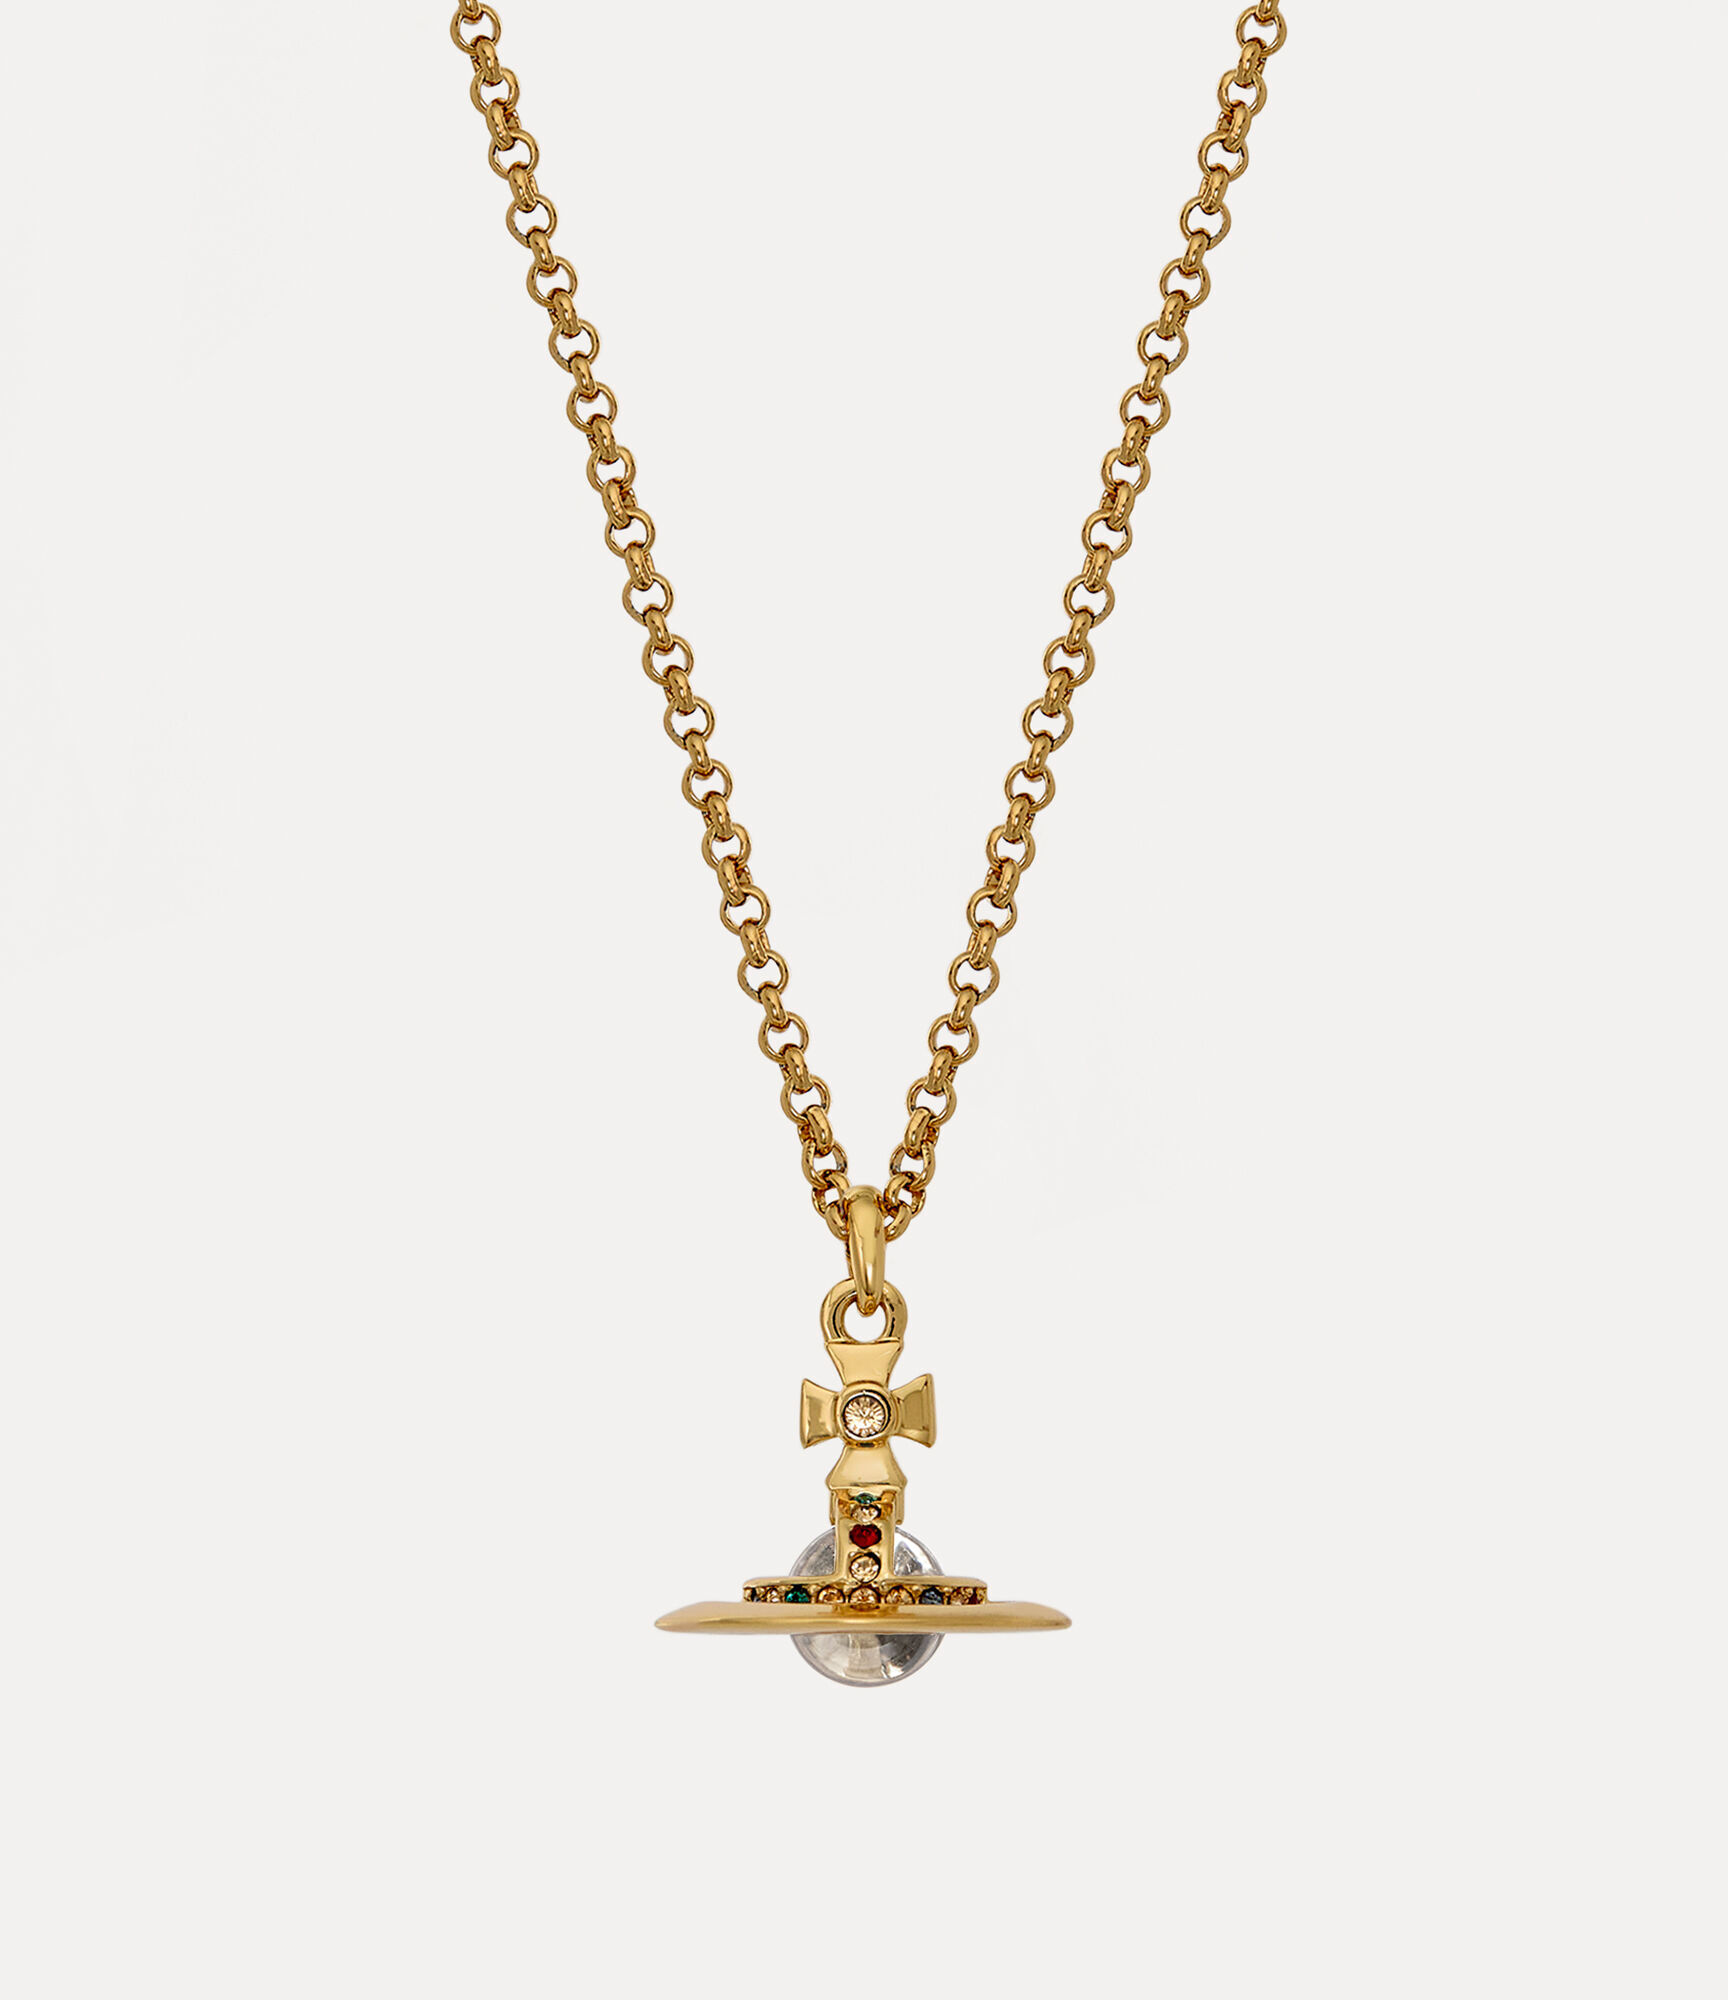 New Petite Orb Pendant Necklace in GOLD | Vivienne Westwood®